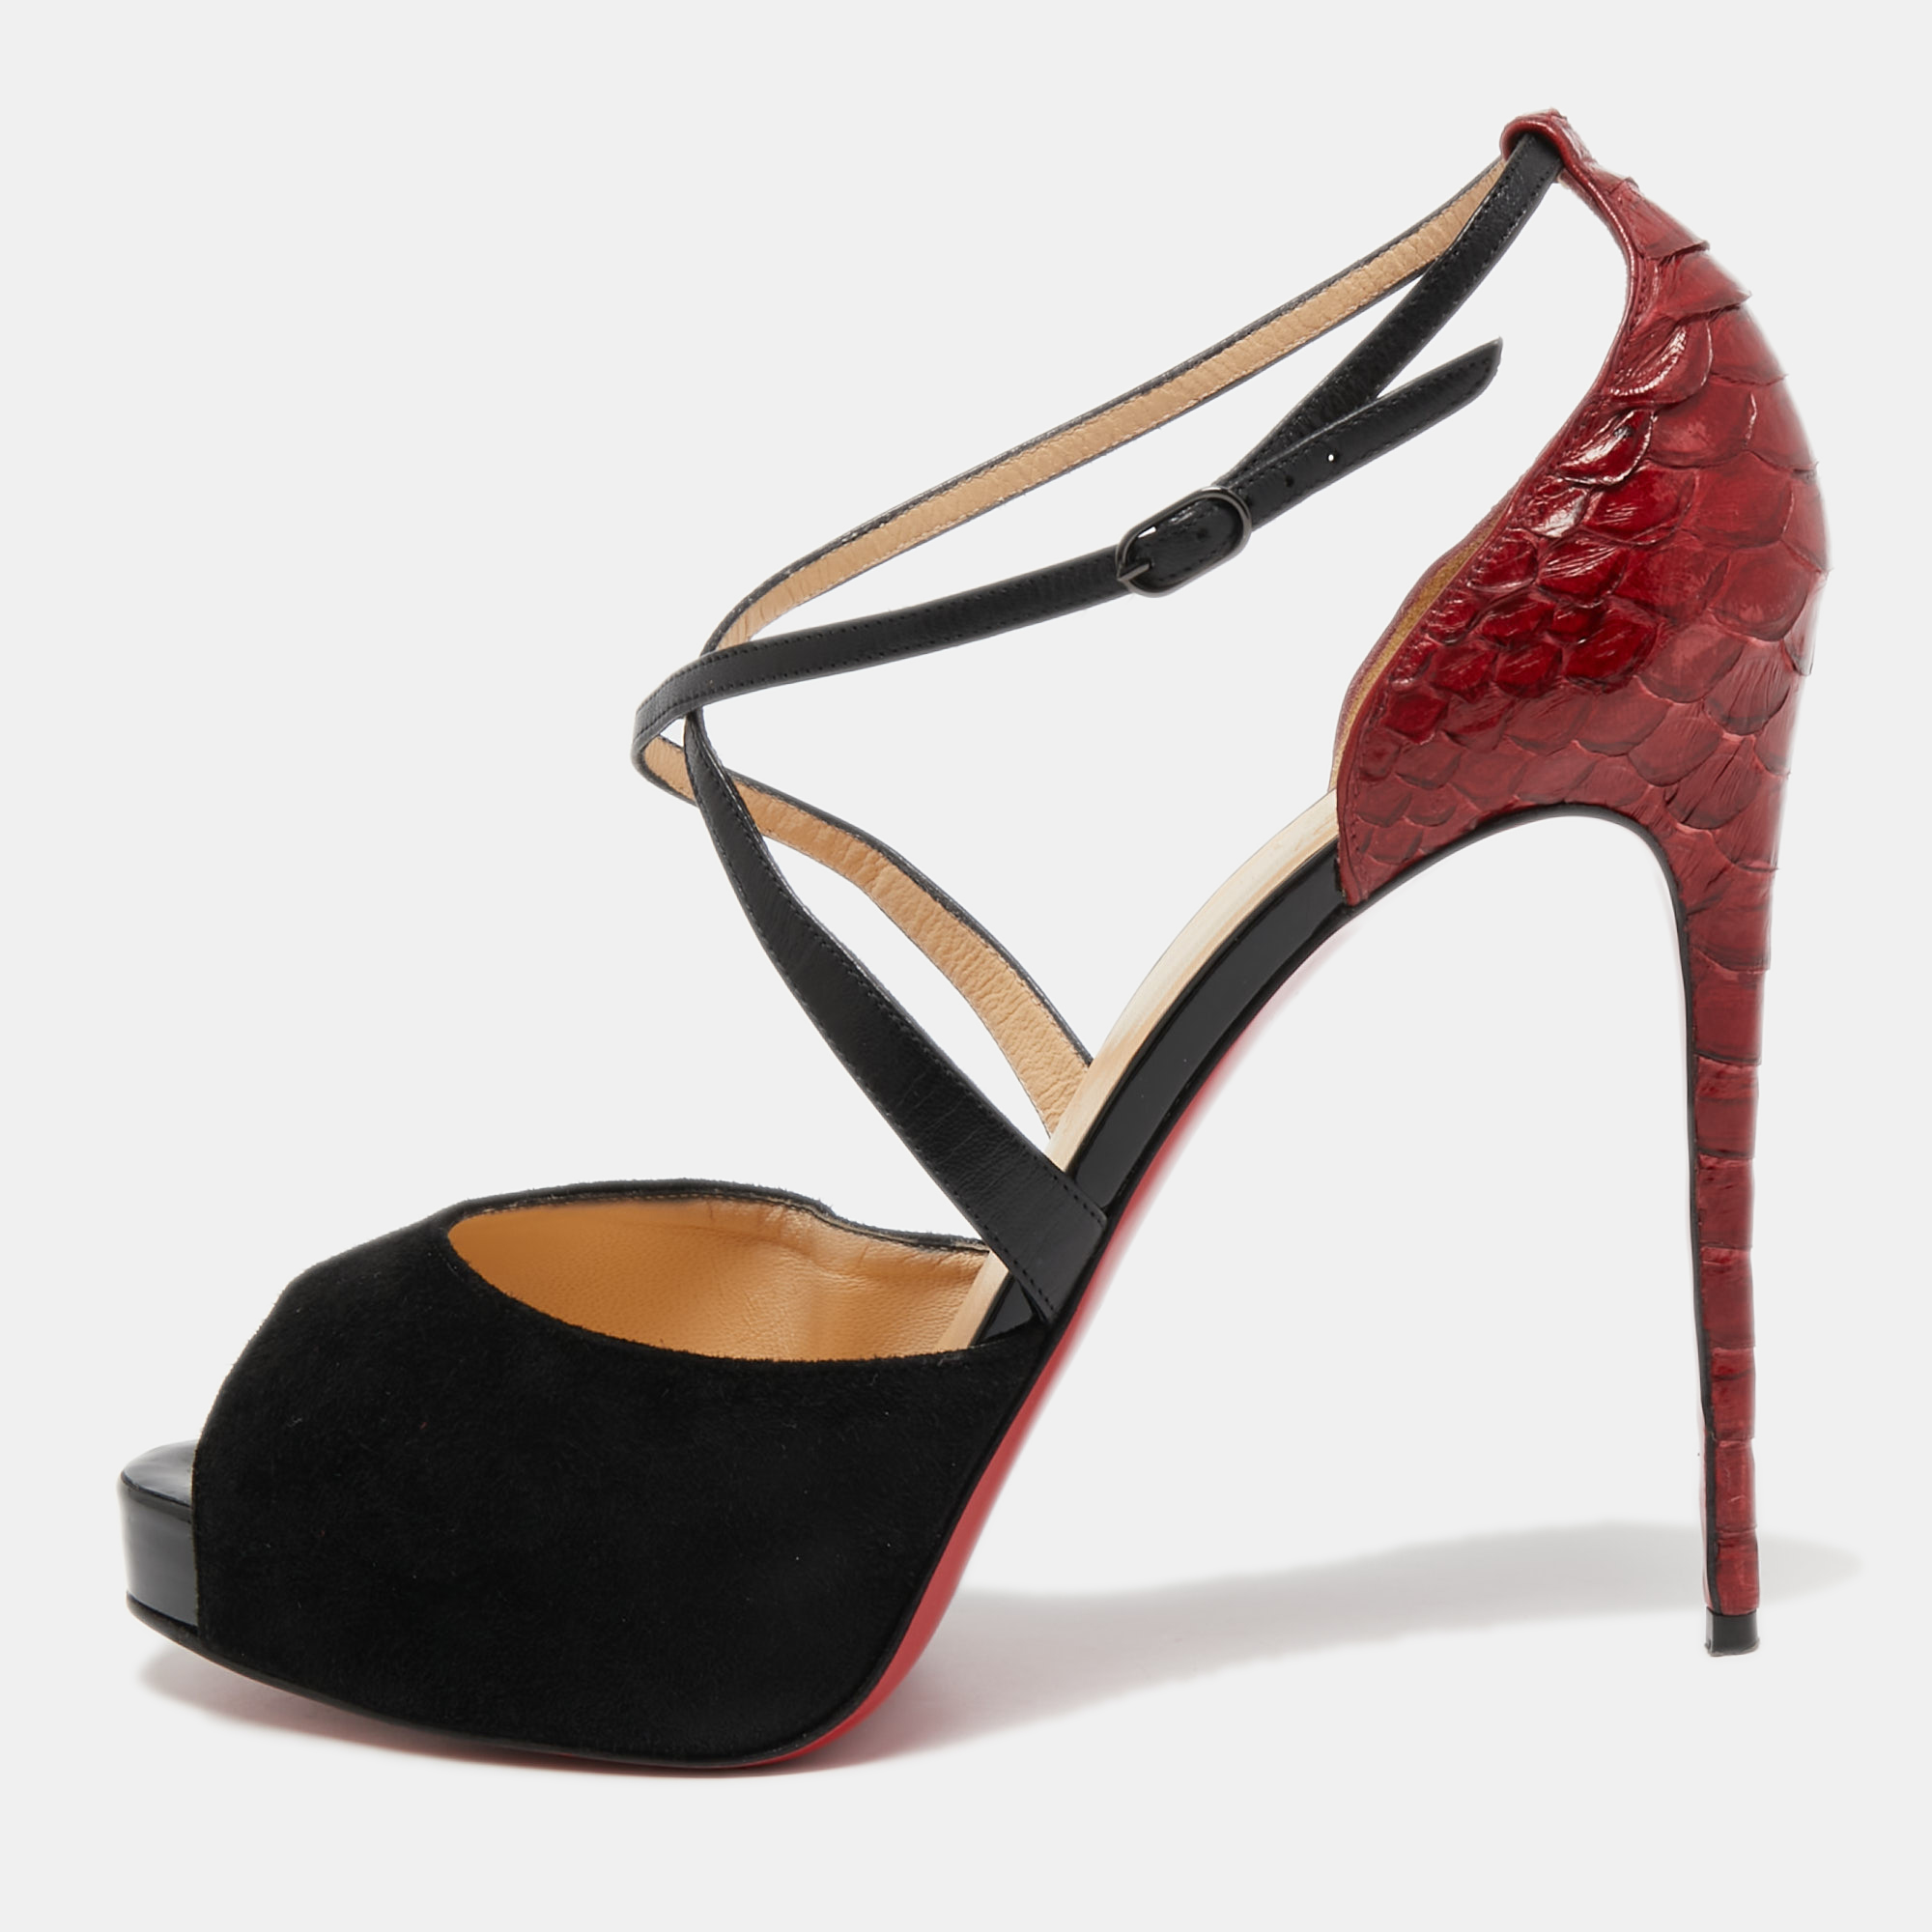 Christian Louboutin Black/Dark Red Leather, Suede And Python Cross Me Sandals Size 40.5